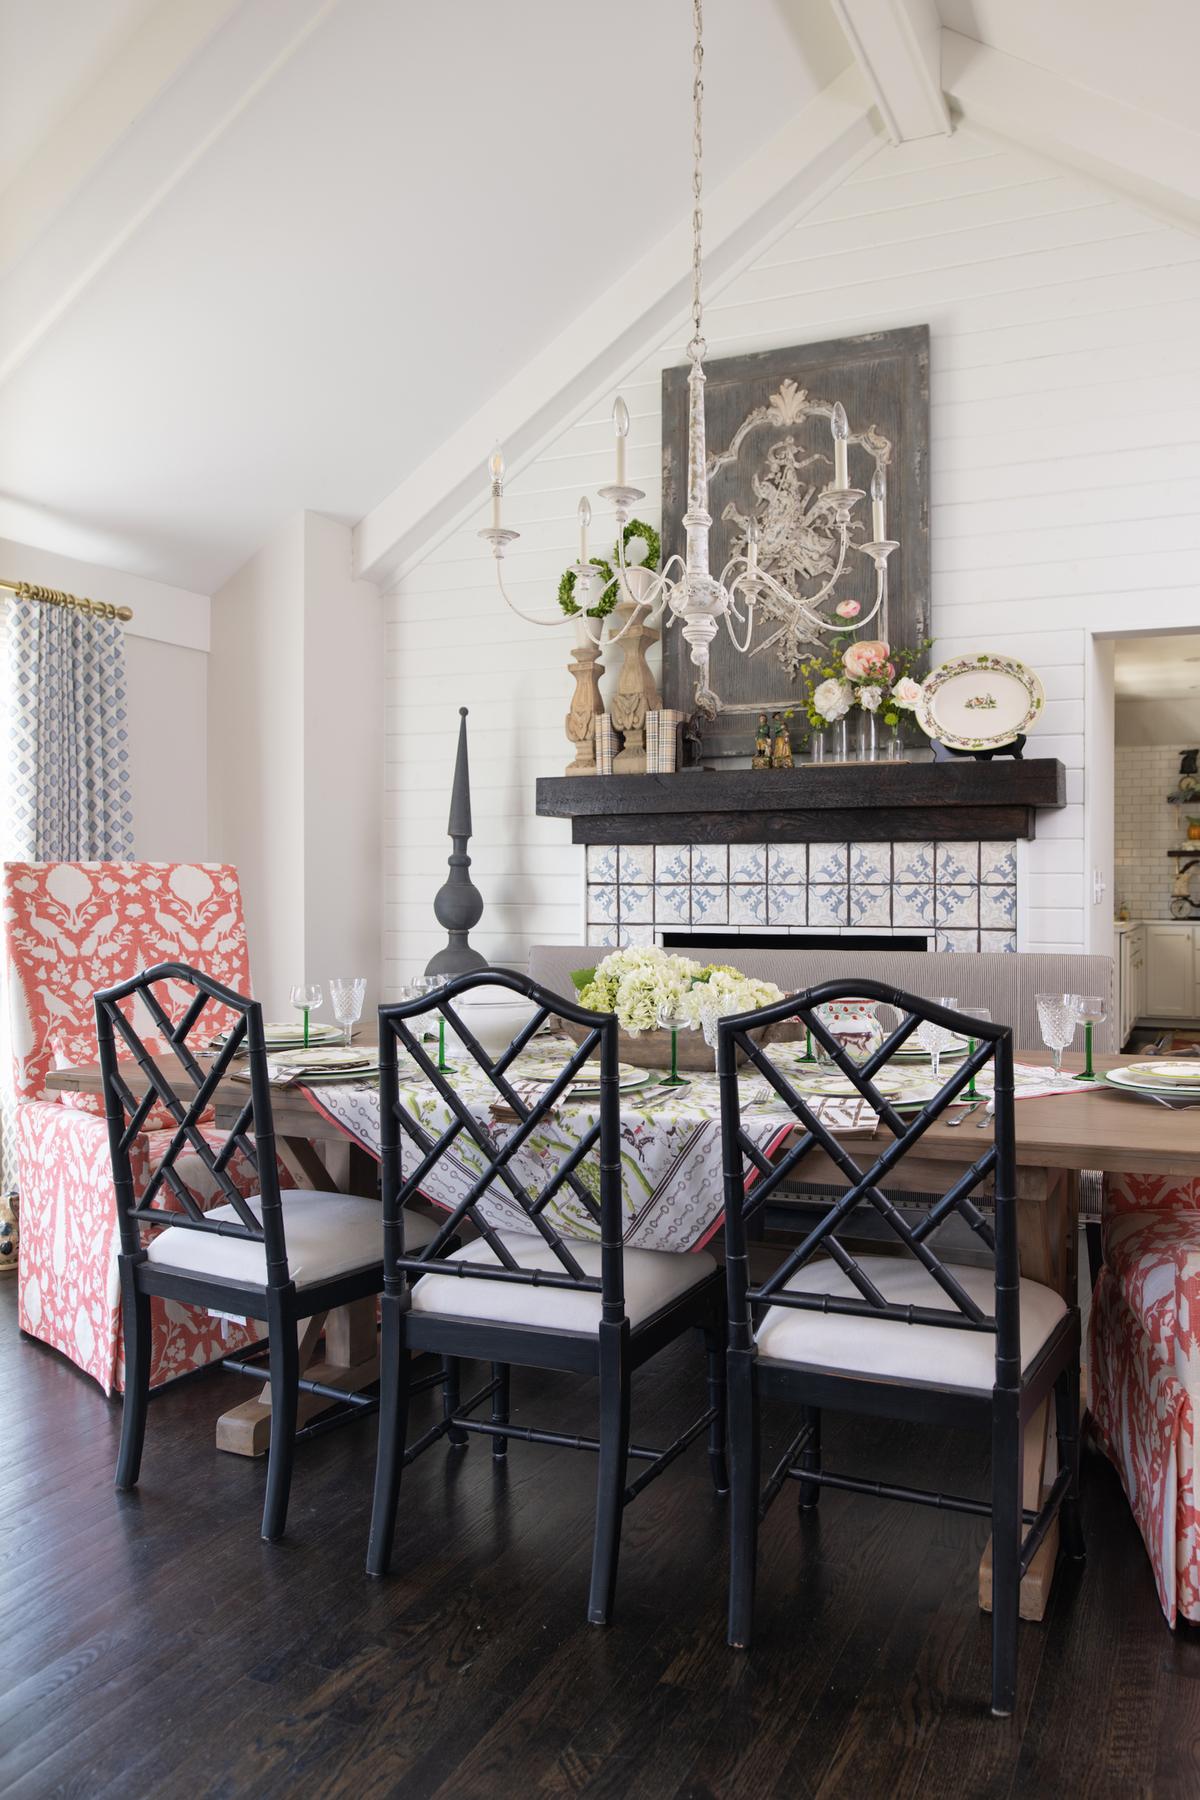 In the dining room, bamboo Chippendale chairs are pulled up to an expansive table, twin upholstered chairs in a coral colorway flank either side in a popular otomi pattern. (Handout/TNS)